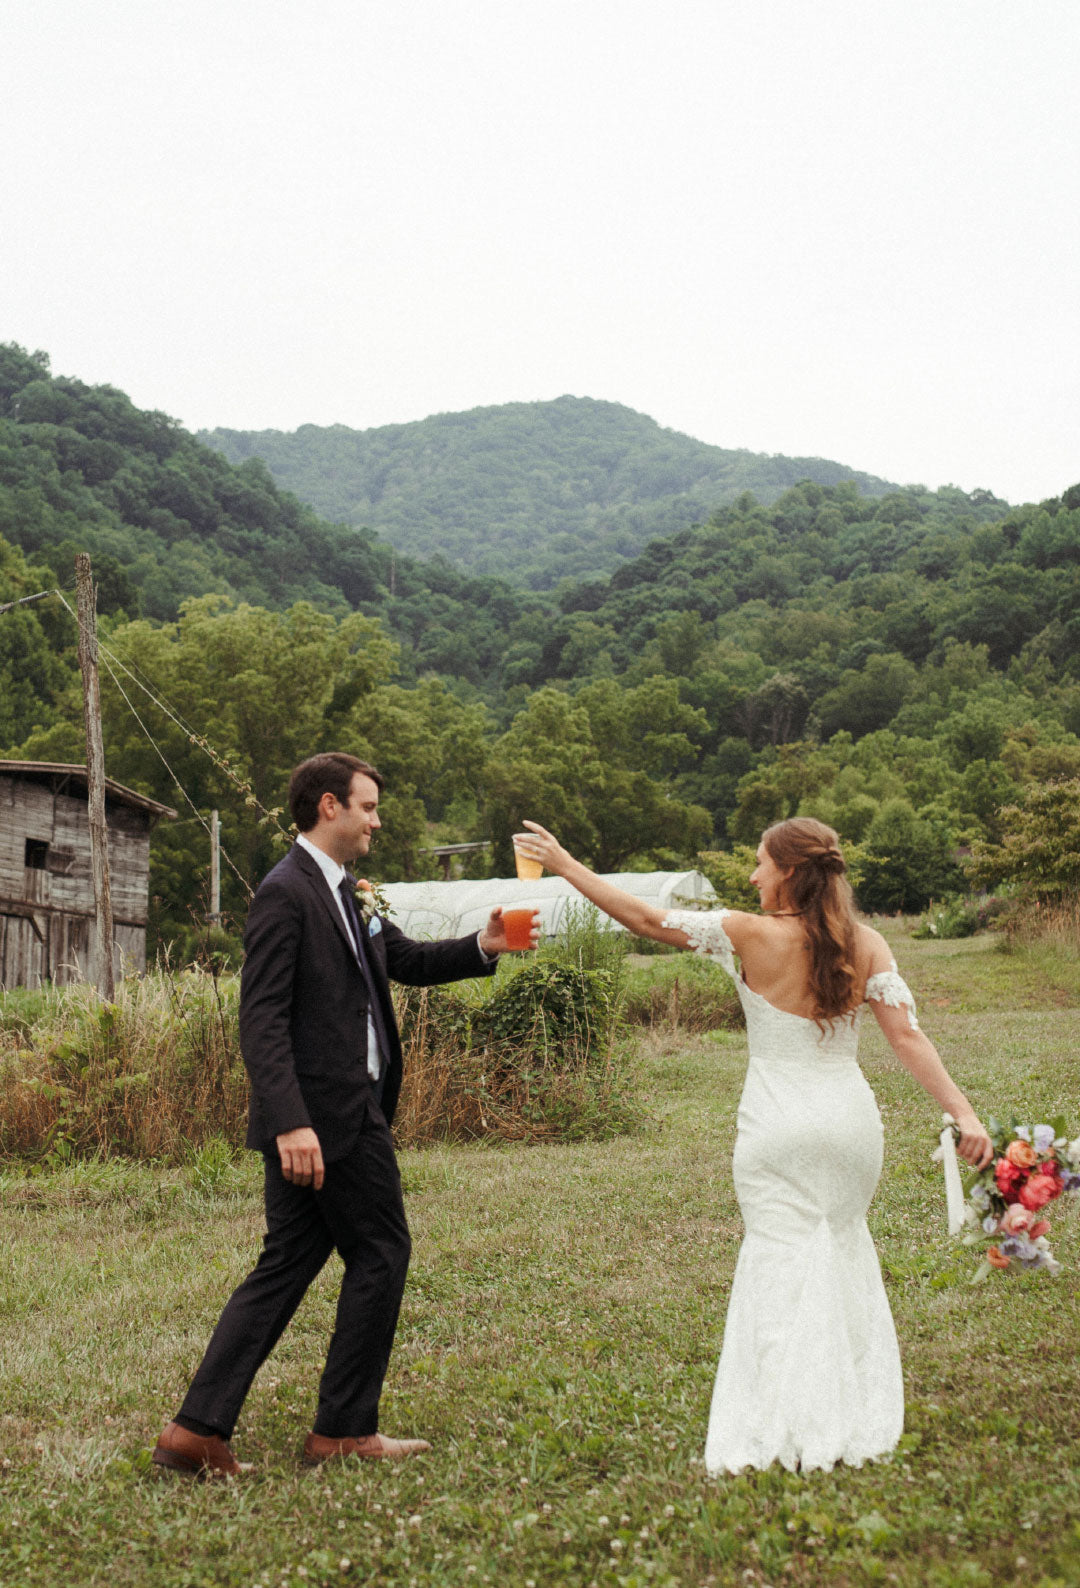 Bride and Groom toast each other